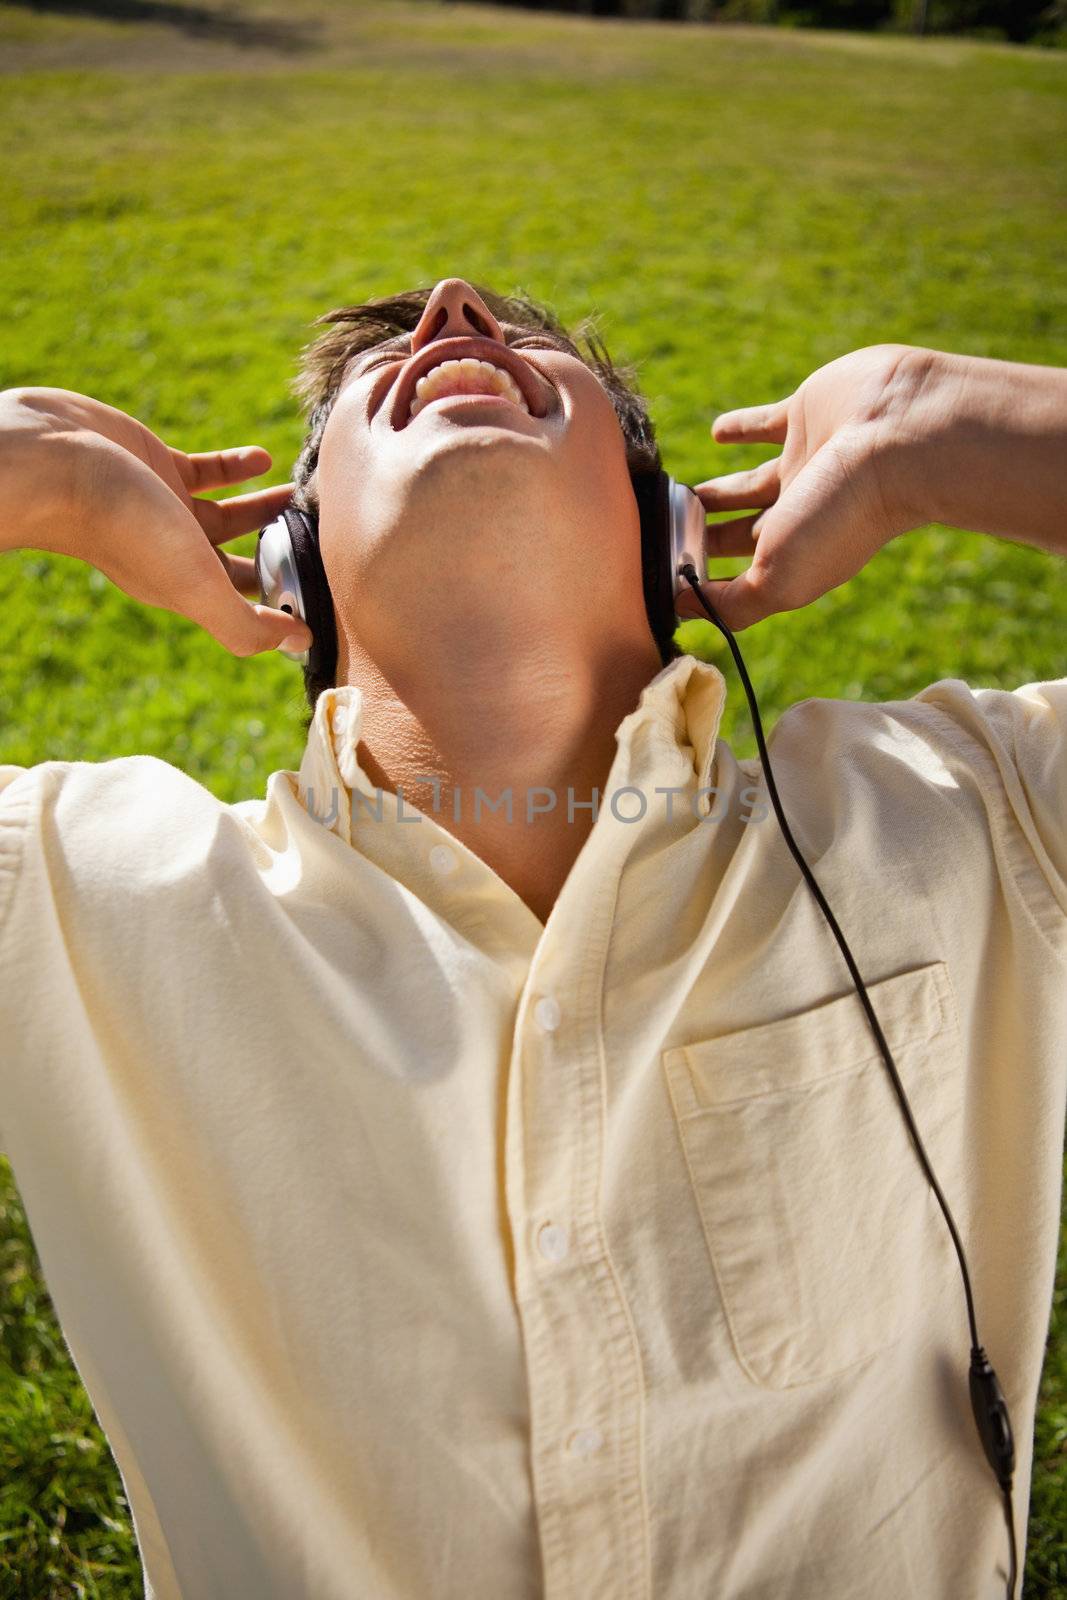 Man singing while using headphones to listen to music as he is sitting in grass